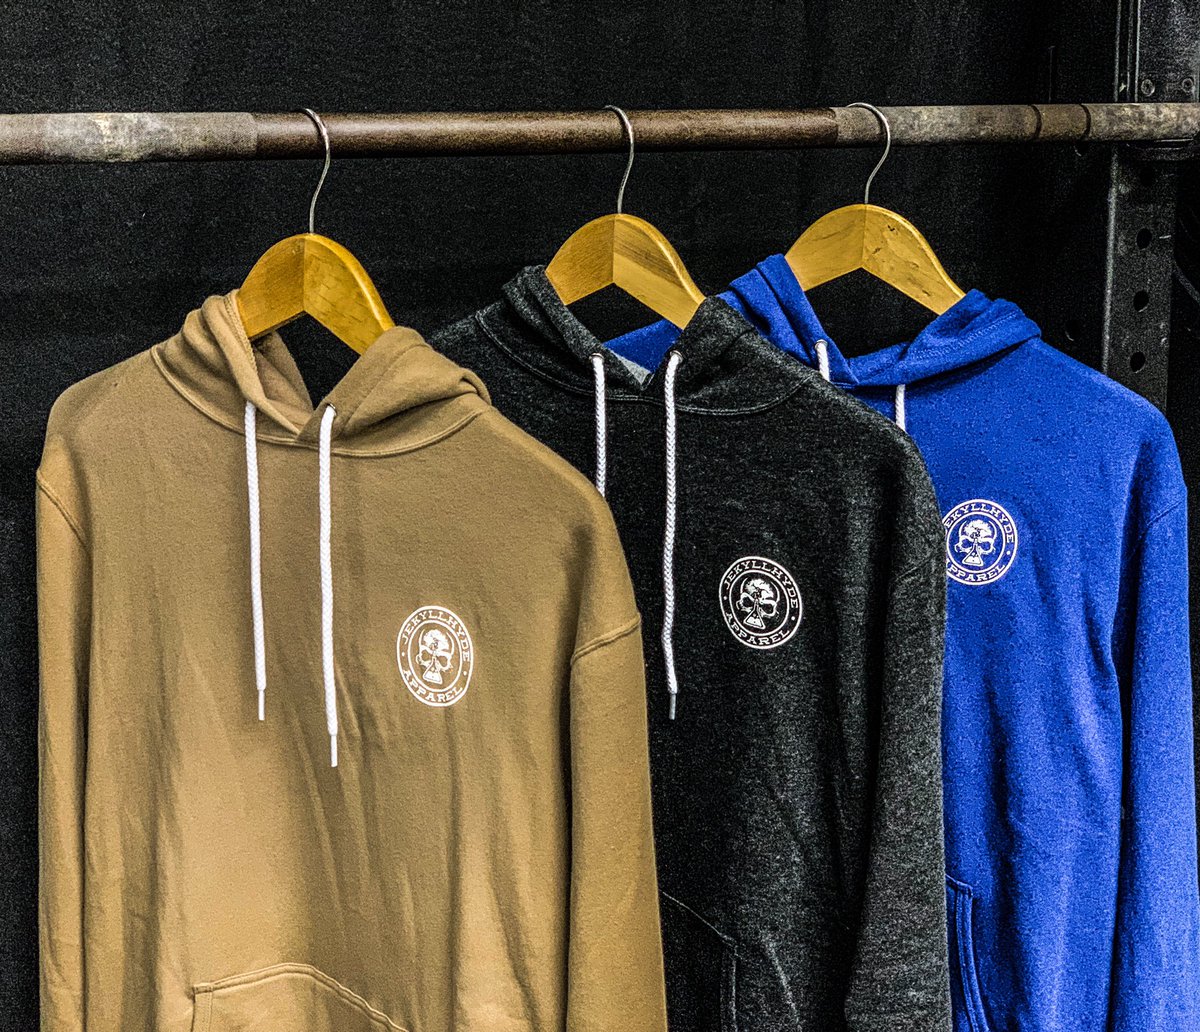 $44.99 for our Premium hoodies. Lightweight, soft AF and priced right. jekyllhydeapparel.com
.
.
#hoodie #pullover #blue #black #tan #jekyllhyde #jh #fitnessapparel #fitness #fall #cold #staywarm #hood #pricedright #barbell #olympicweightlifting #ocr